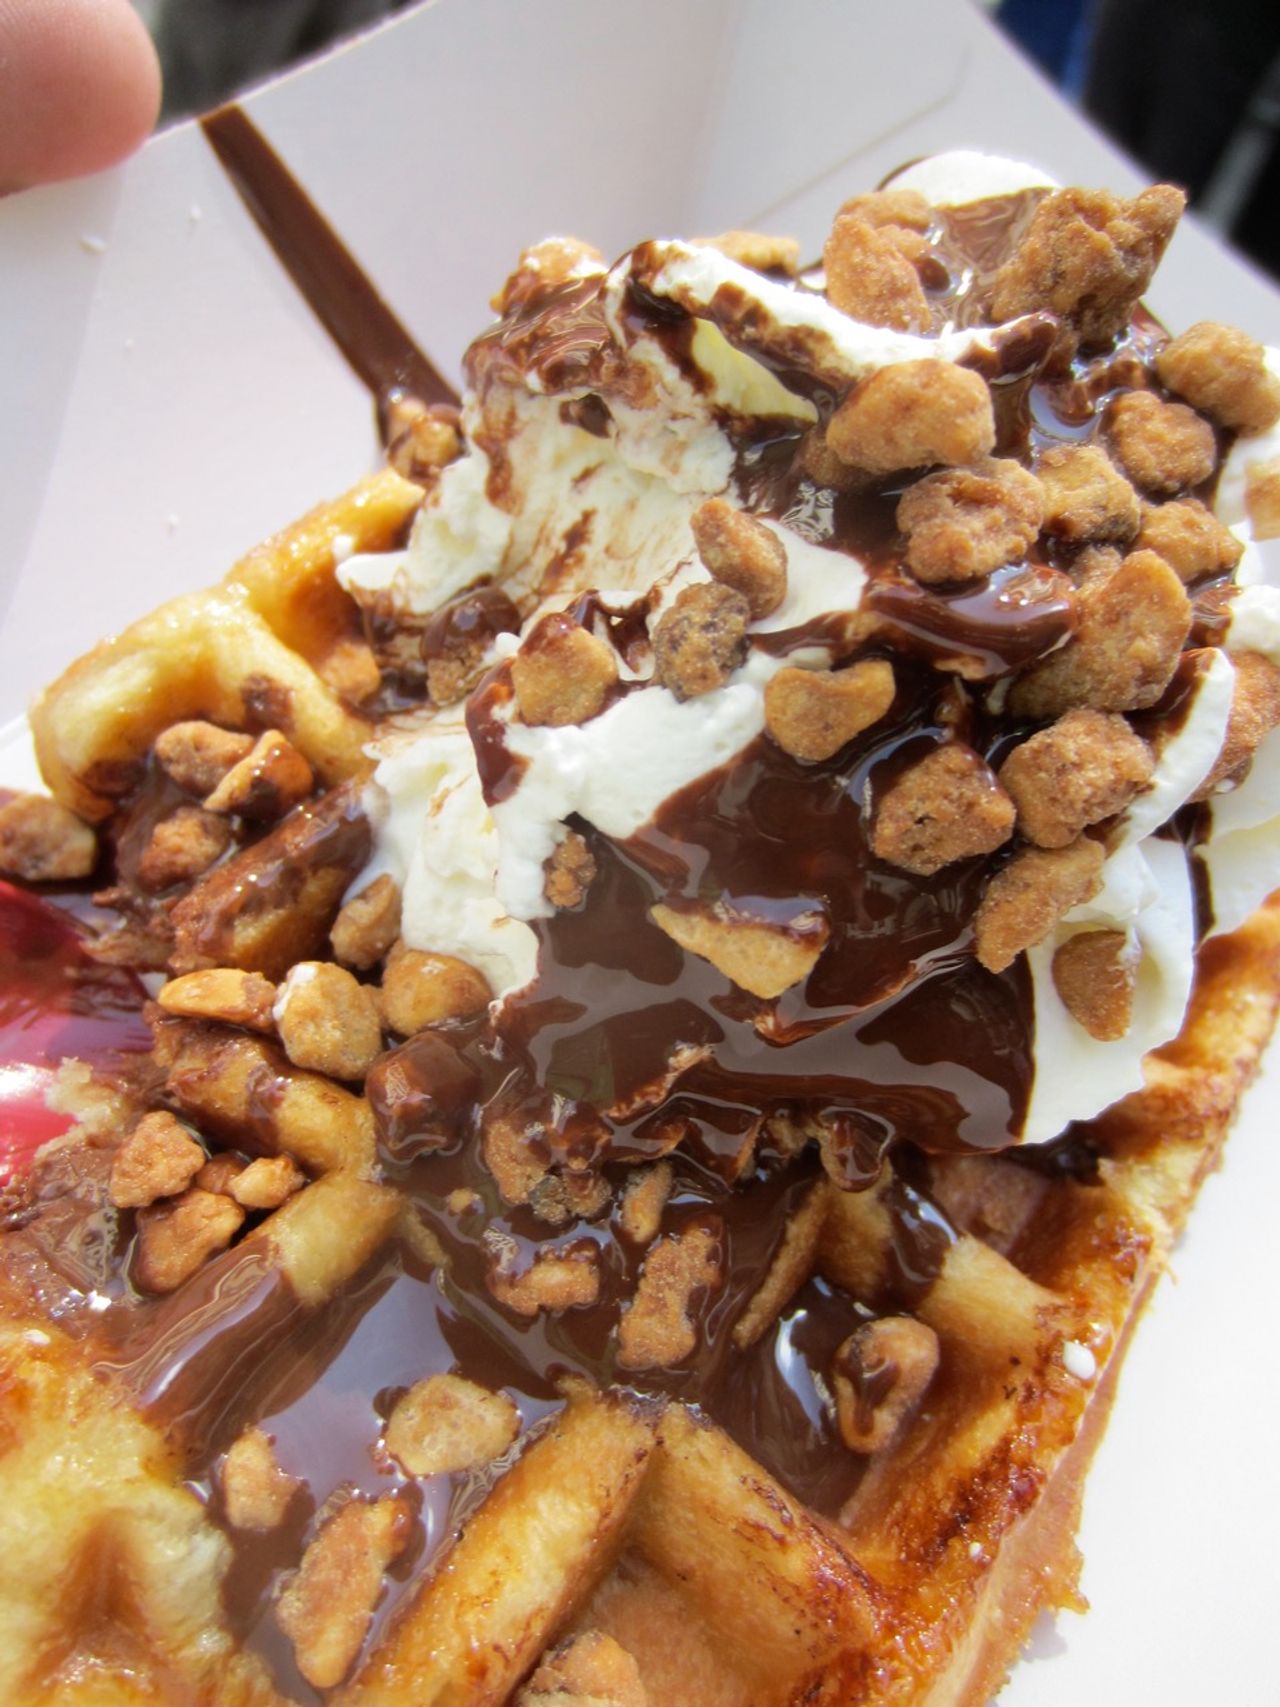 A belgian waffle with cream and other toppings.